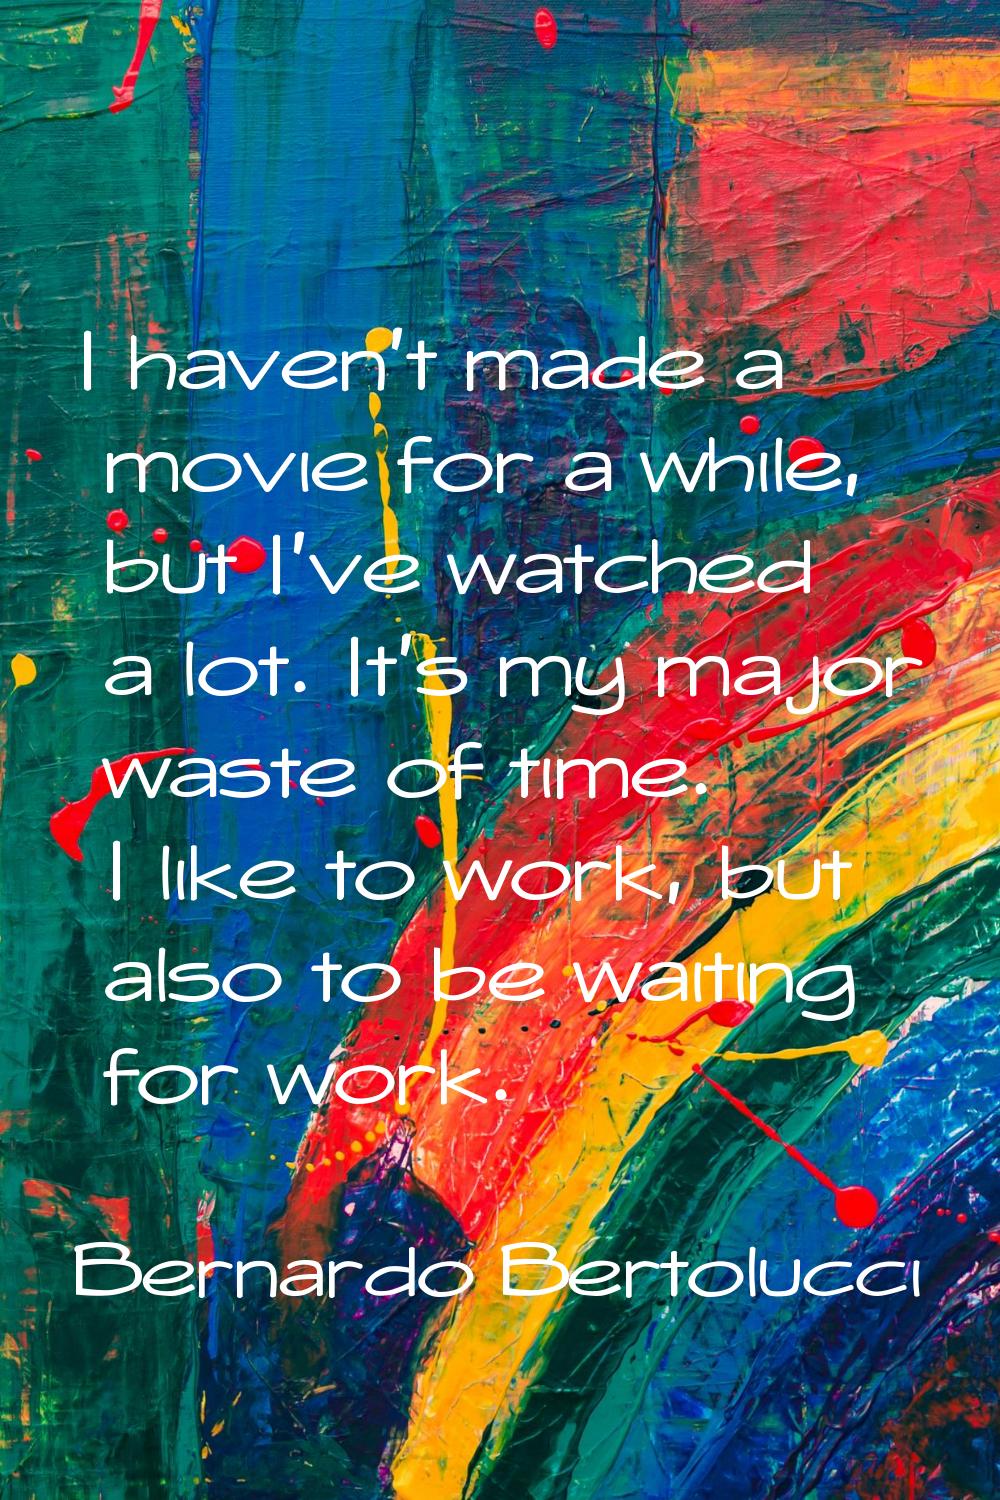 I haven't made a movie for a while, but I've watched a lot. It's my major waste of time. I like to 